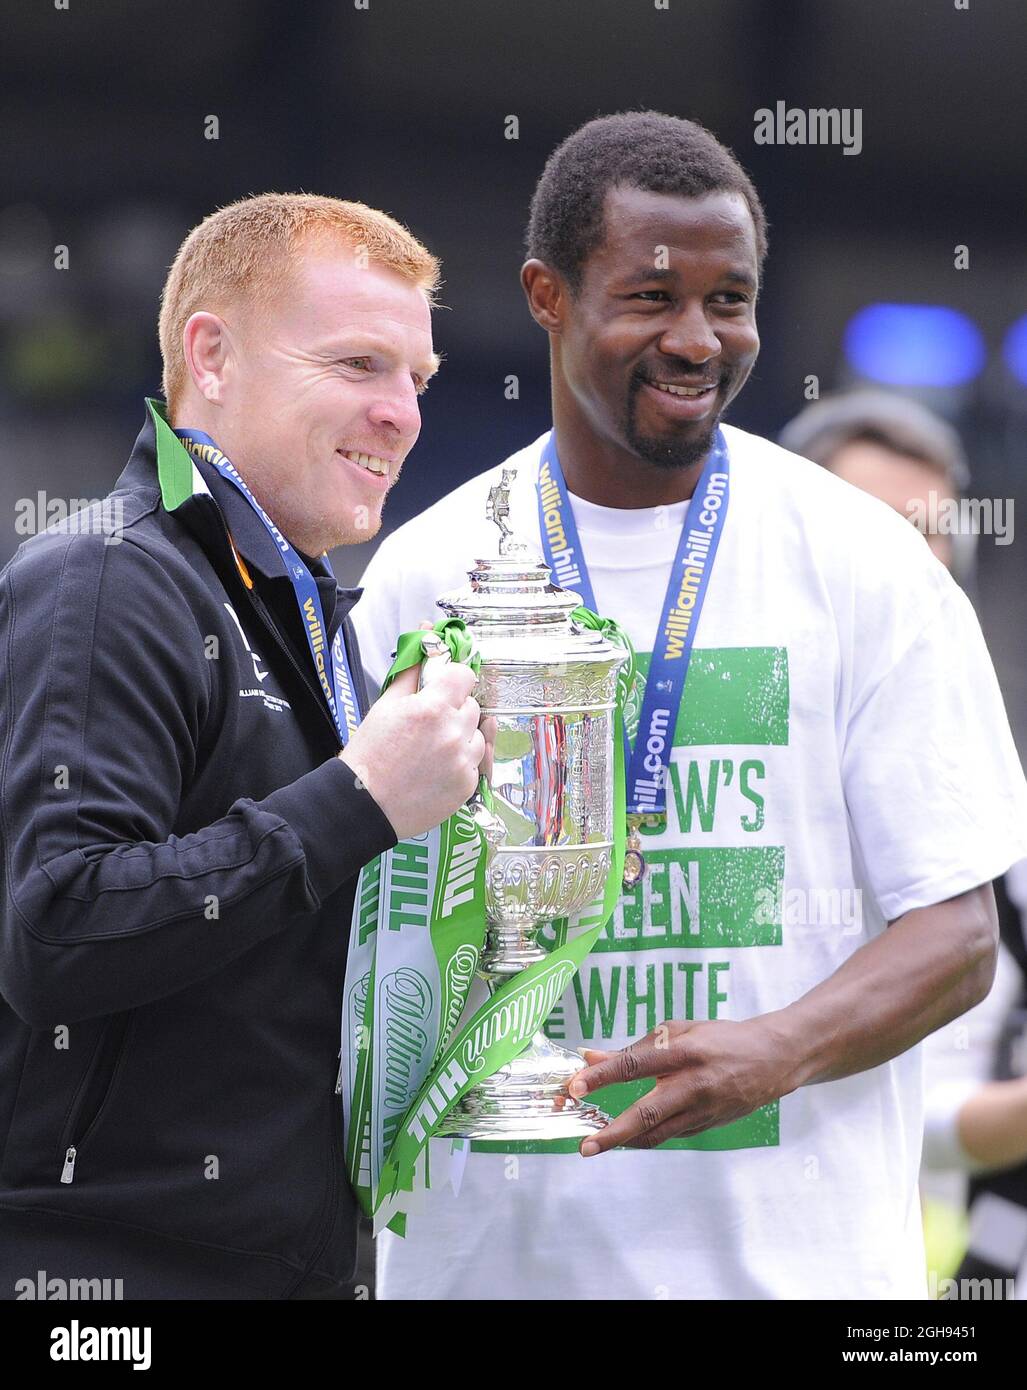 Celtic's Neil Lennon with Celtic's Efe Ambrose and the Scottish Cup during the William Hill Scottish Cup Final between Hibernian and Celtic at the Hampden Park Stadium in Glasgow, Scotland on May 26, 2013. Picture Simon Bellis Stock Photo